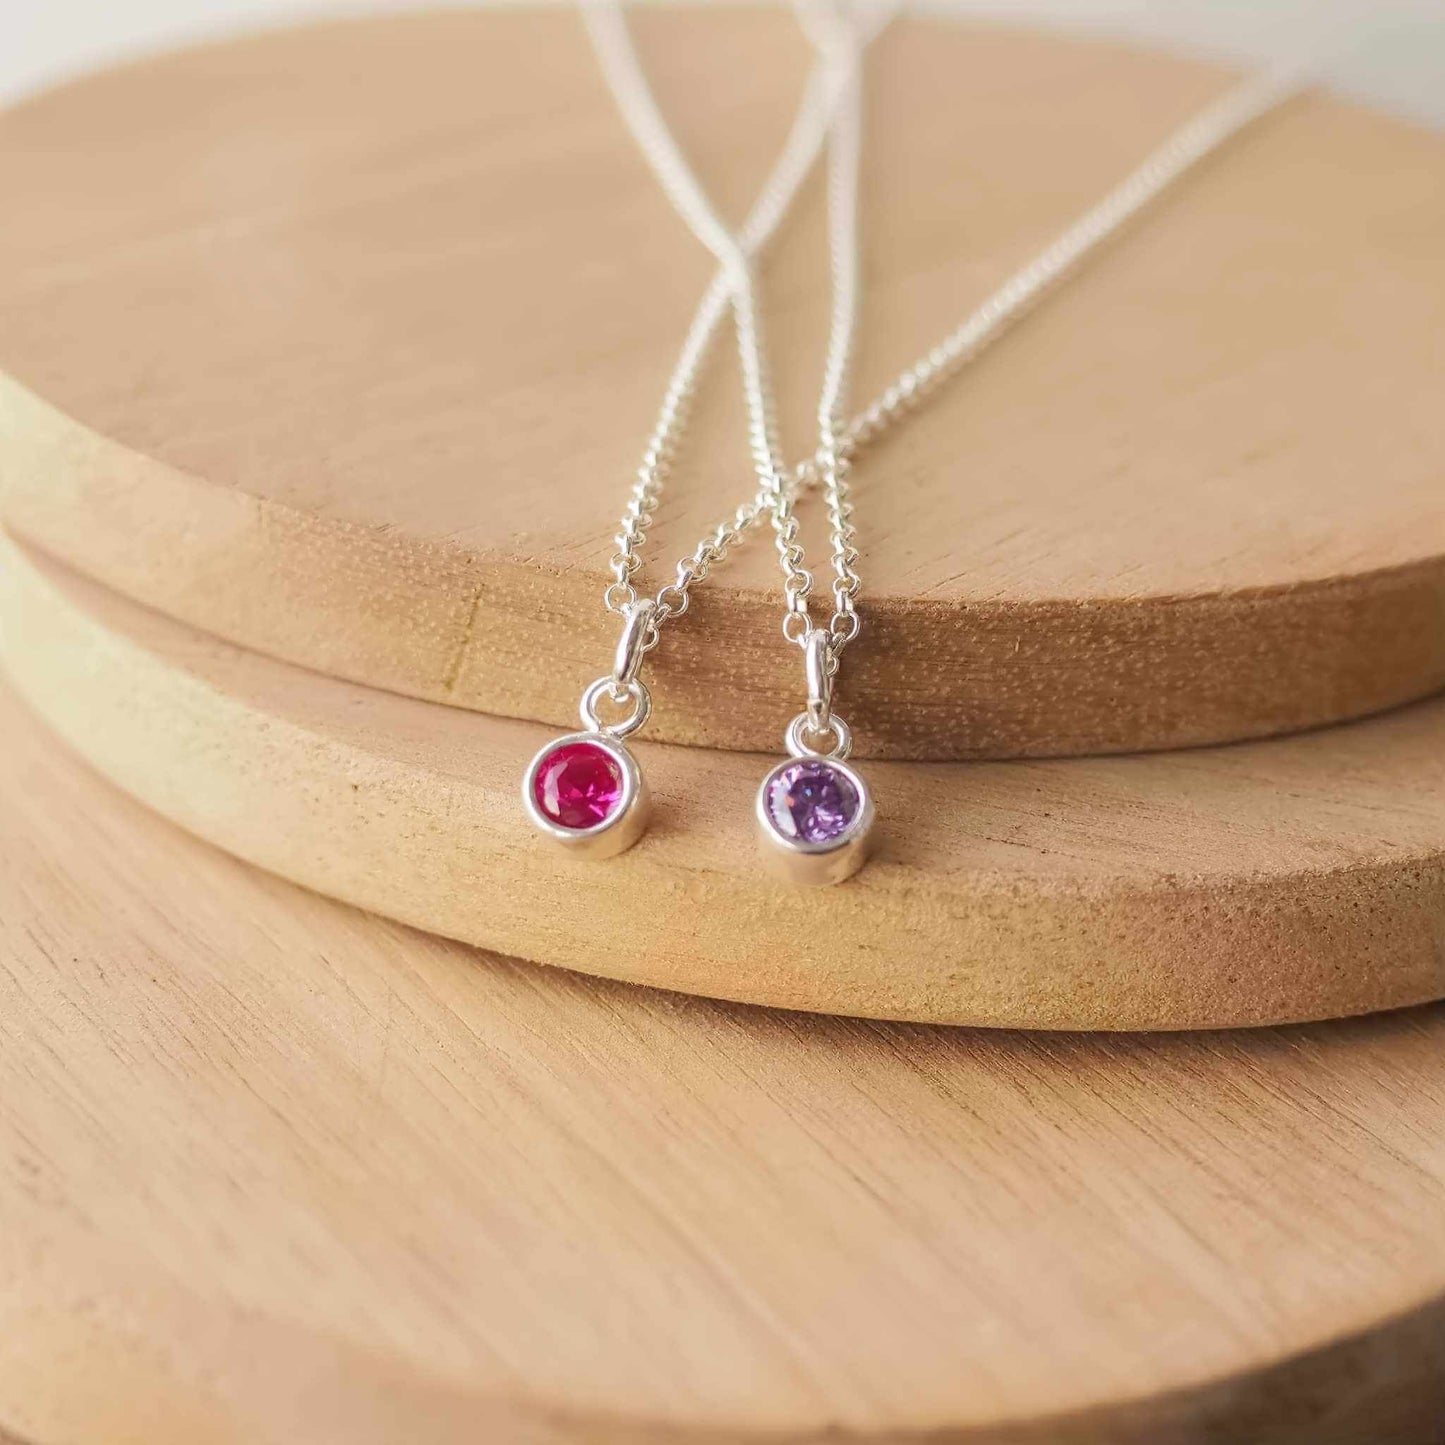 Two Sterling Silver and Cubic Zirconia necklaces in red and purple. Small 4mm facet round gemstones with a simple silver setting on a trace style chain. Handmade in Scotland by Maram Jewellery